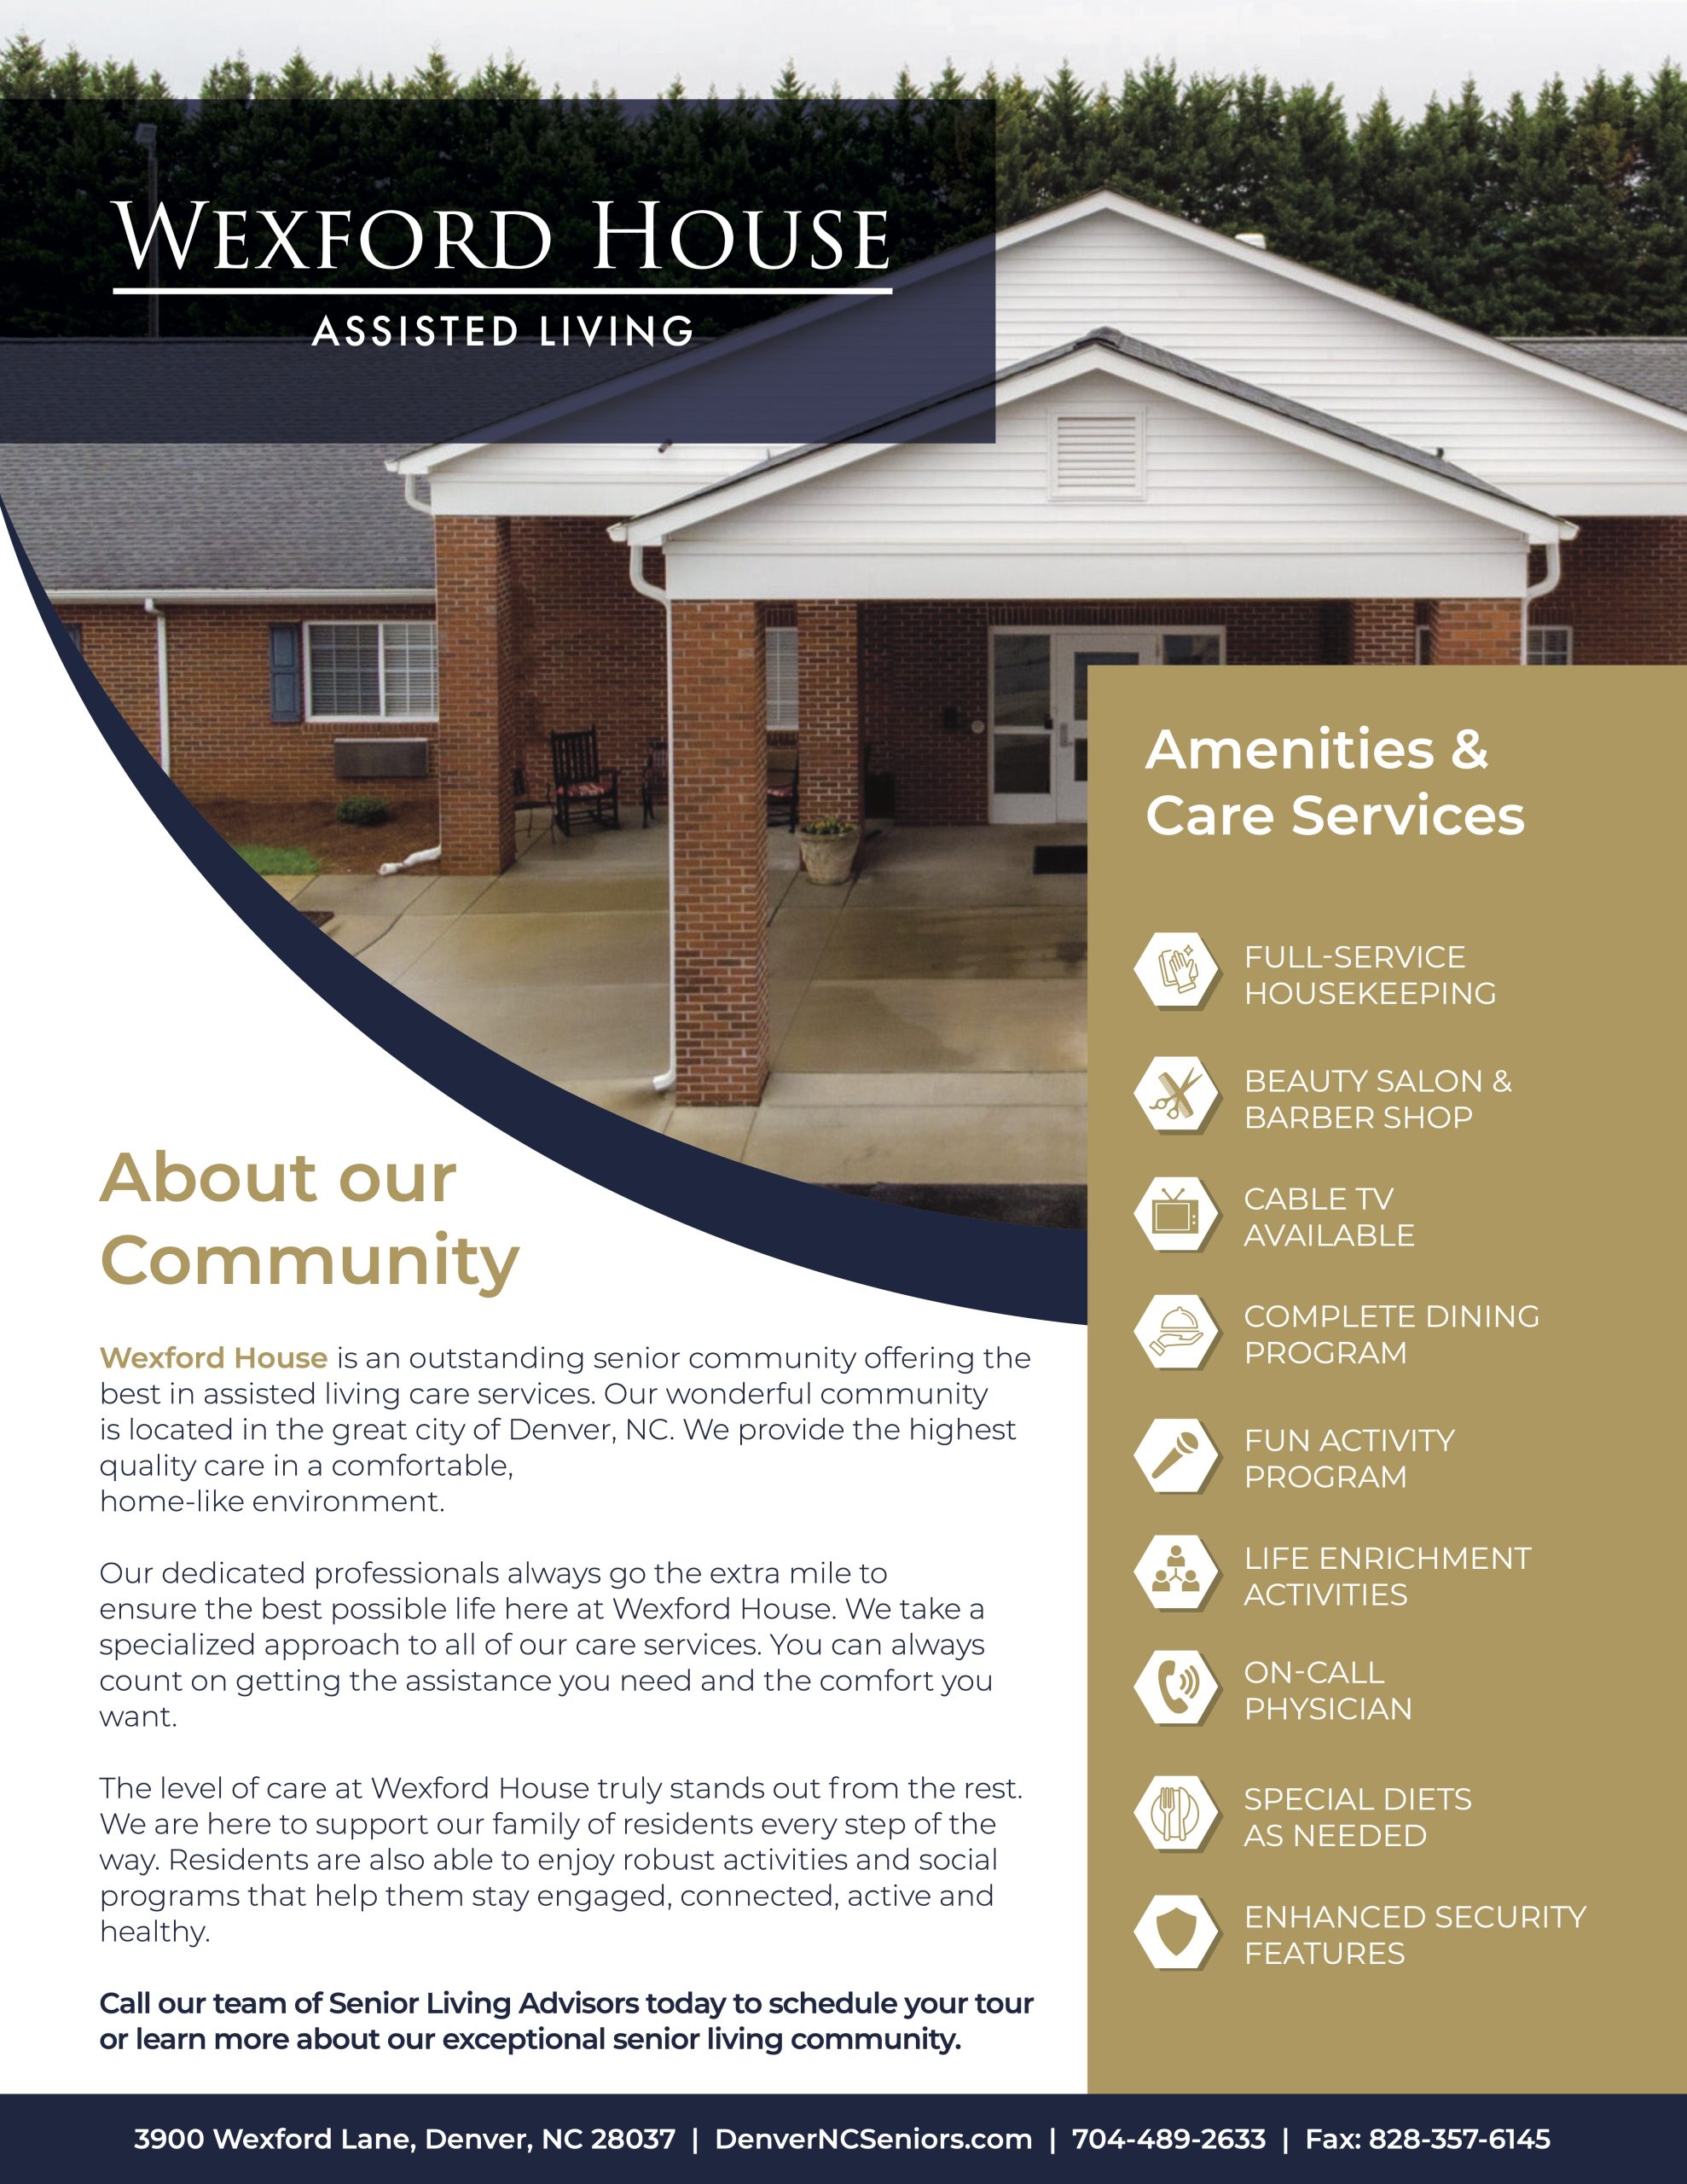 Wexford House - About our Services